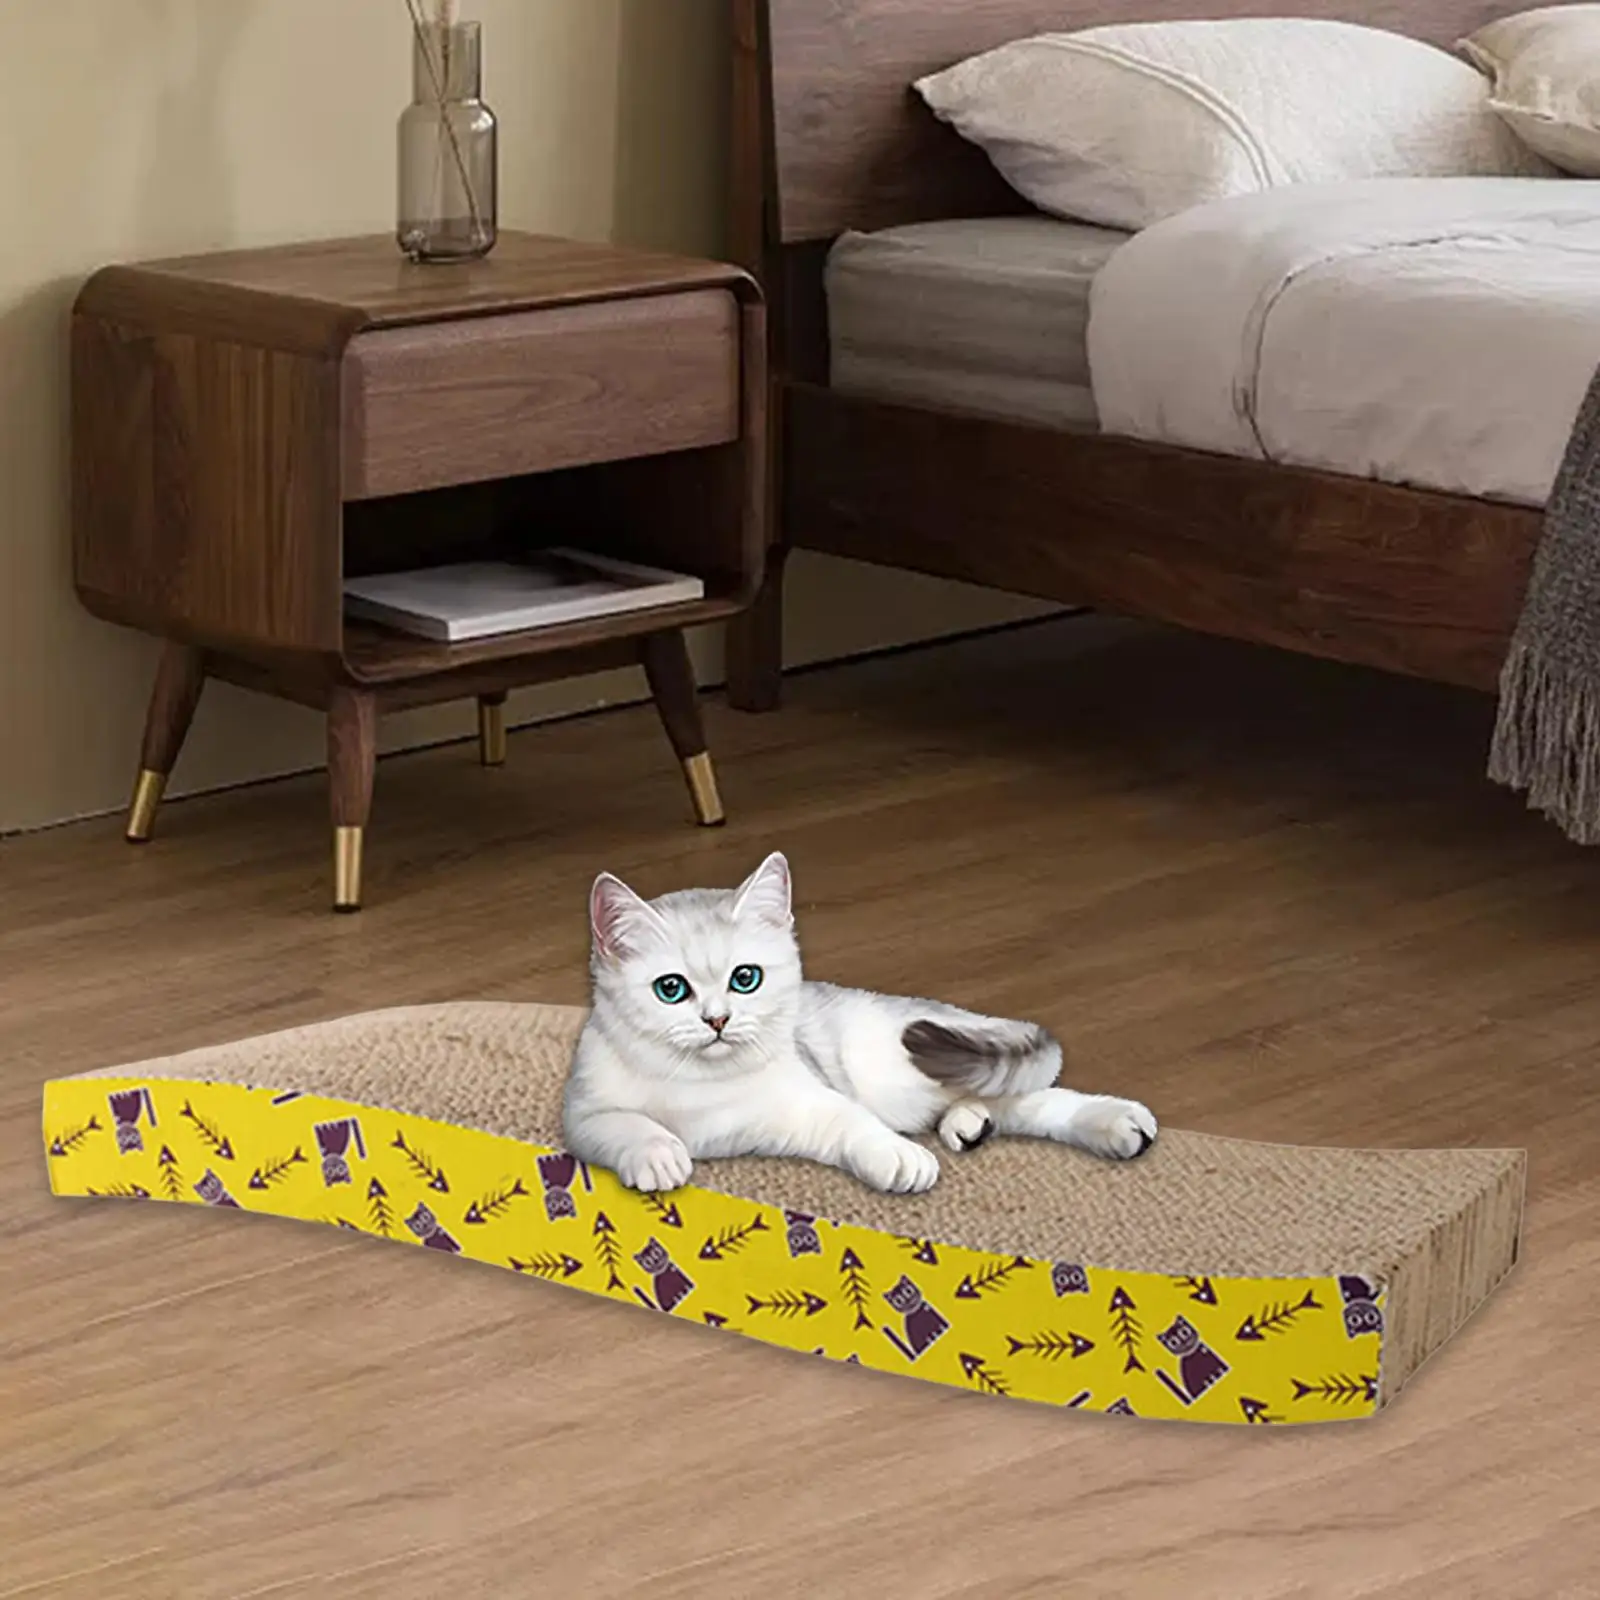 Cat Scratching Board Cat Scratch Pad Nest Cat Scratchers Cardboard Scratching Lounge Bed for Kitten Play Furniture Protection